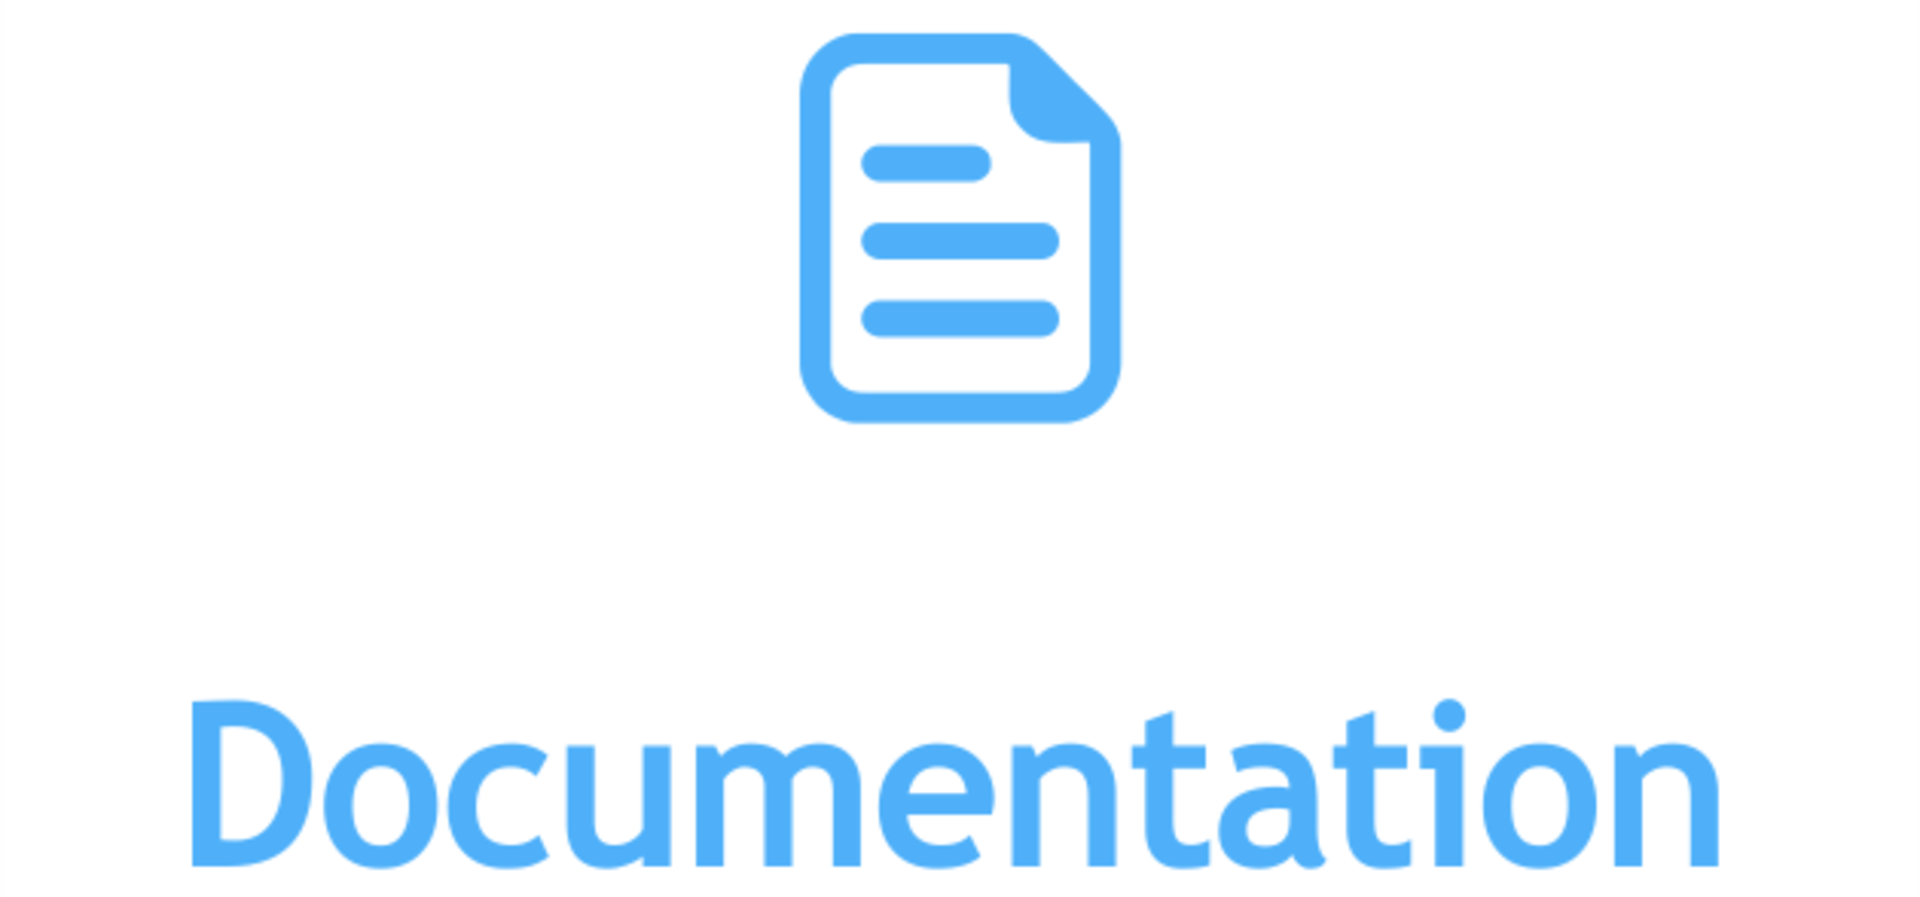 How To Encourage Analysts To Do More Documentation